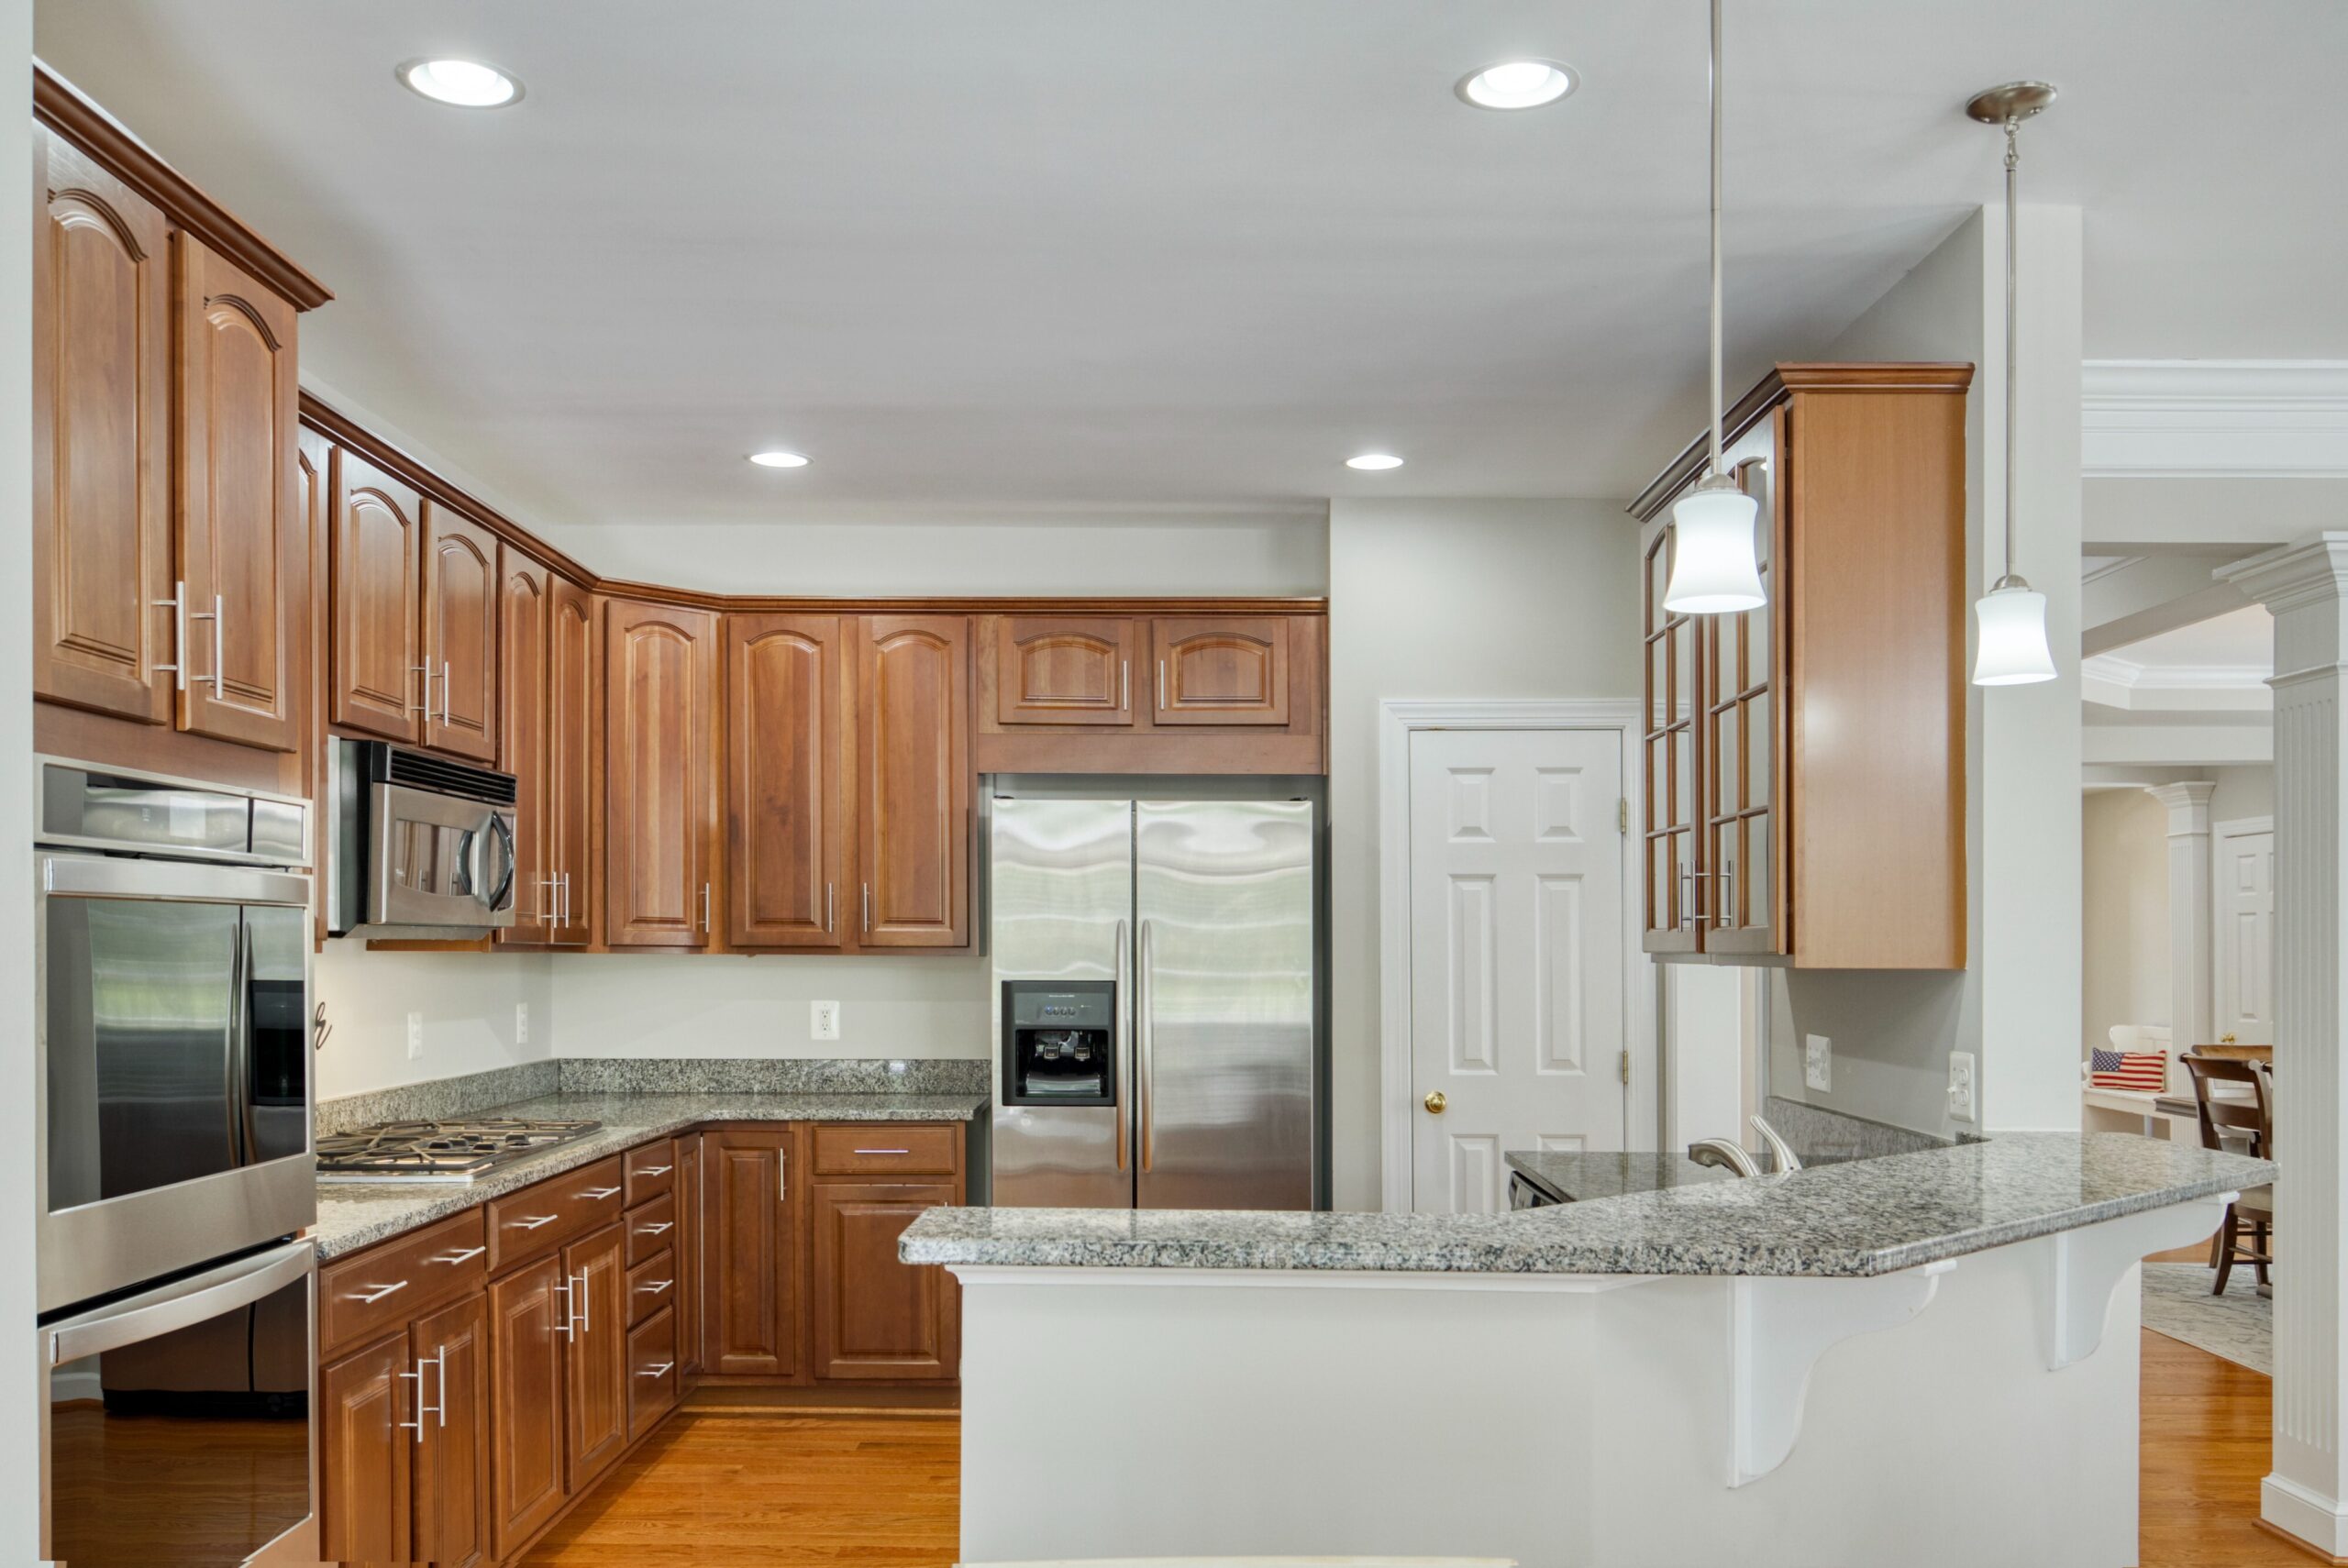 Townhome kitchen with walnut cabinets, stainless steel appliances and large granite counters